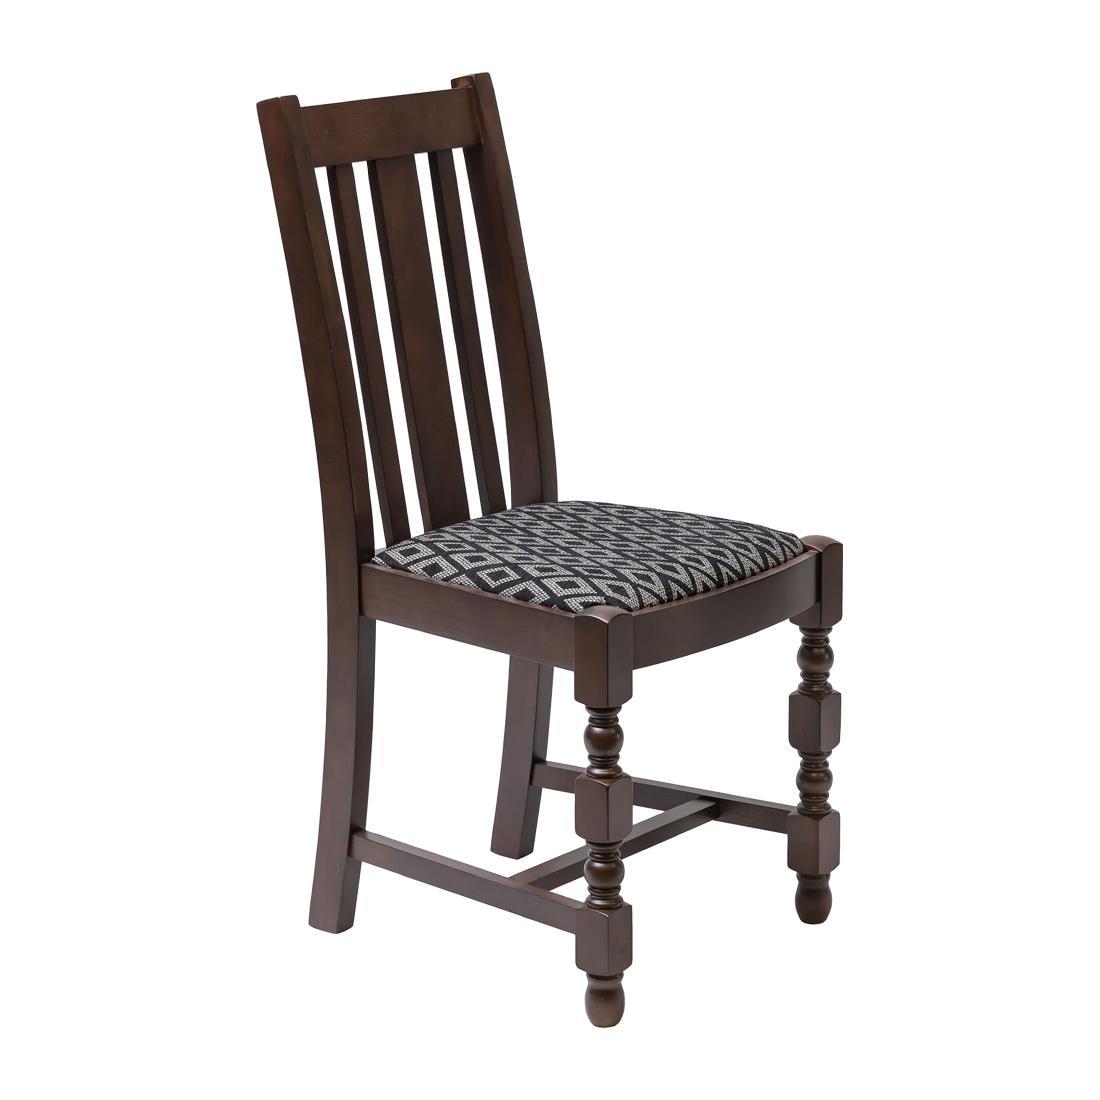 Manhattan Dark Wood High Back Dining Chair with Black Diamond Padded Seat (Pack of 2)